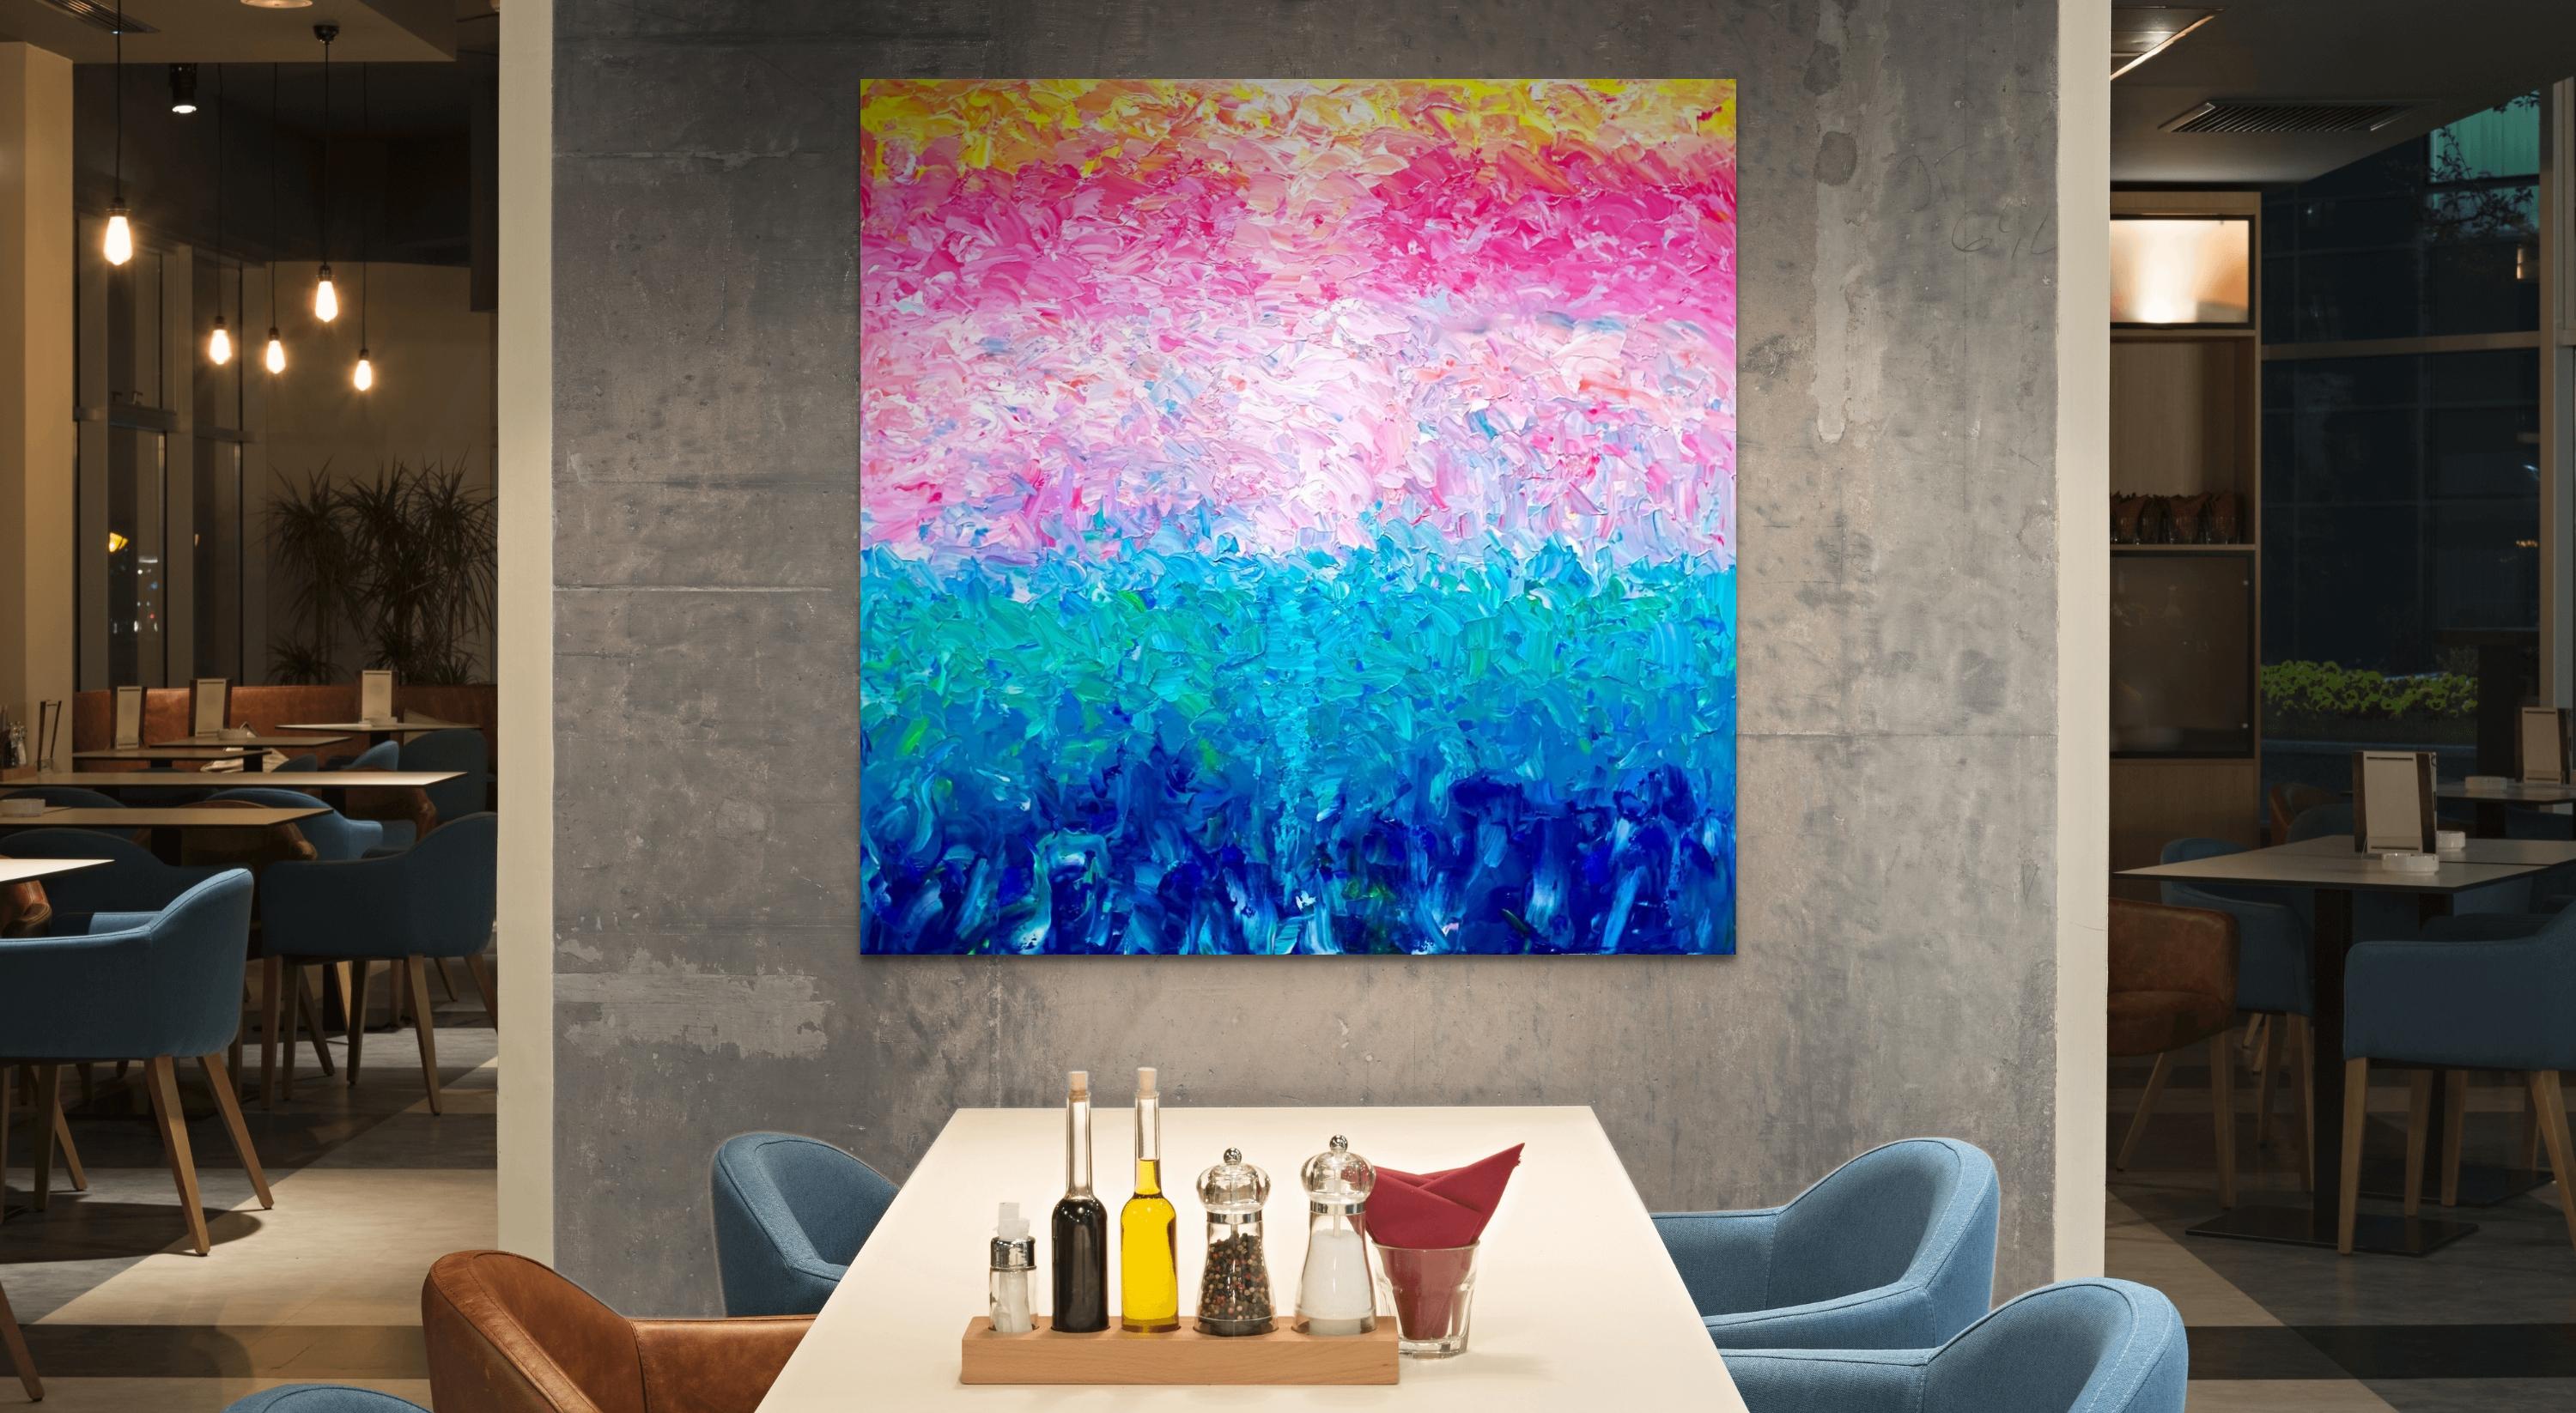 This artwork is a minimalistic landscape with a pillar of light in the centre. It is subtle yet the colours are bright and vibrant, while the work is in the style of abstract expressionism.

This artwork is painted on professional-grade canvas